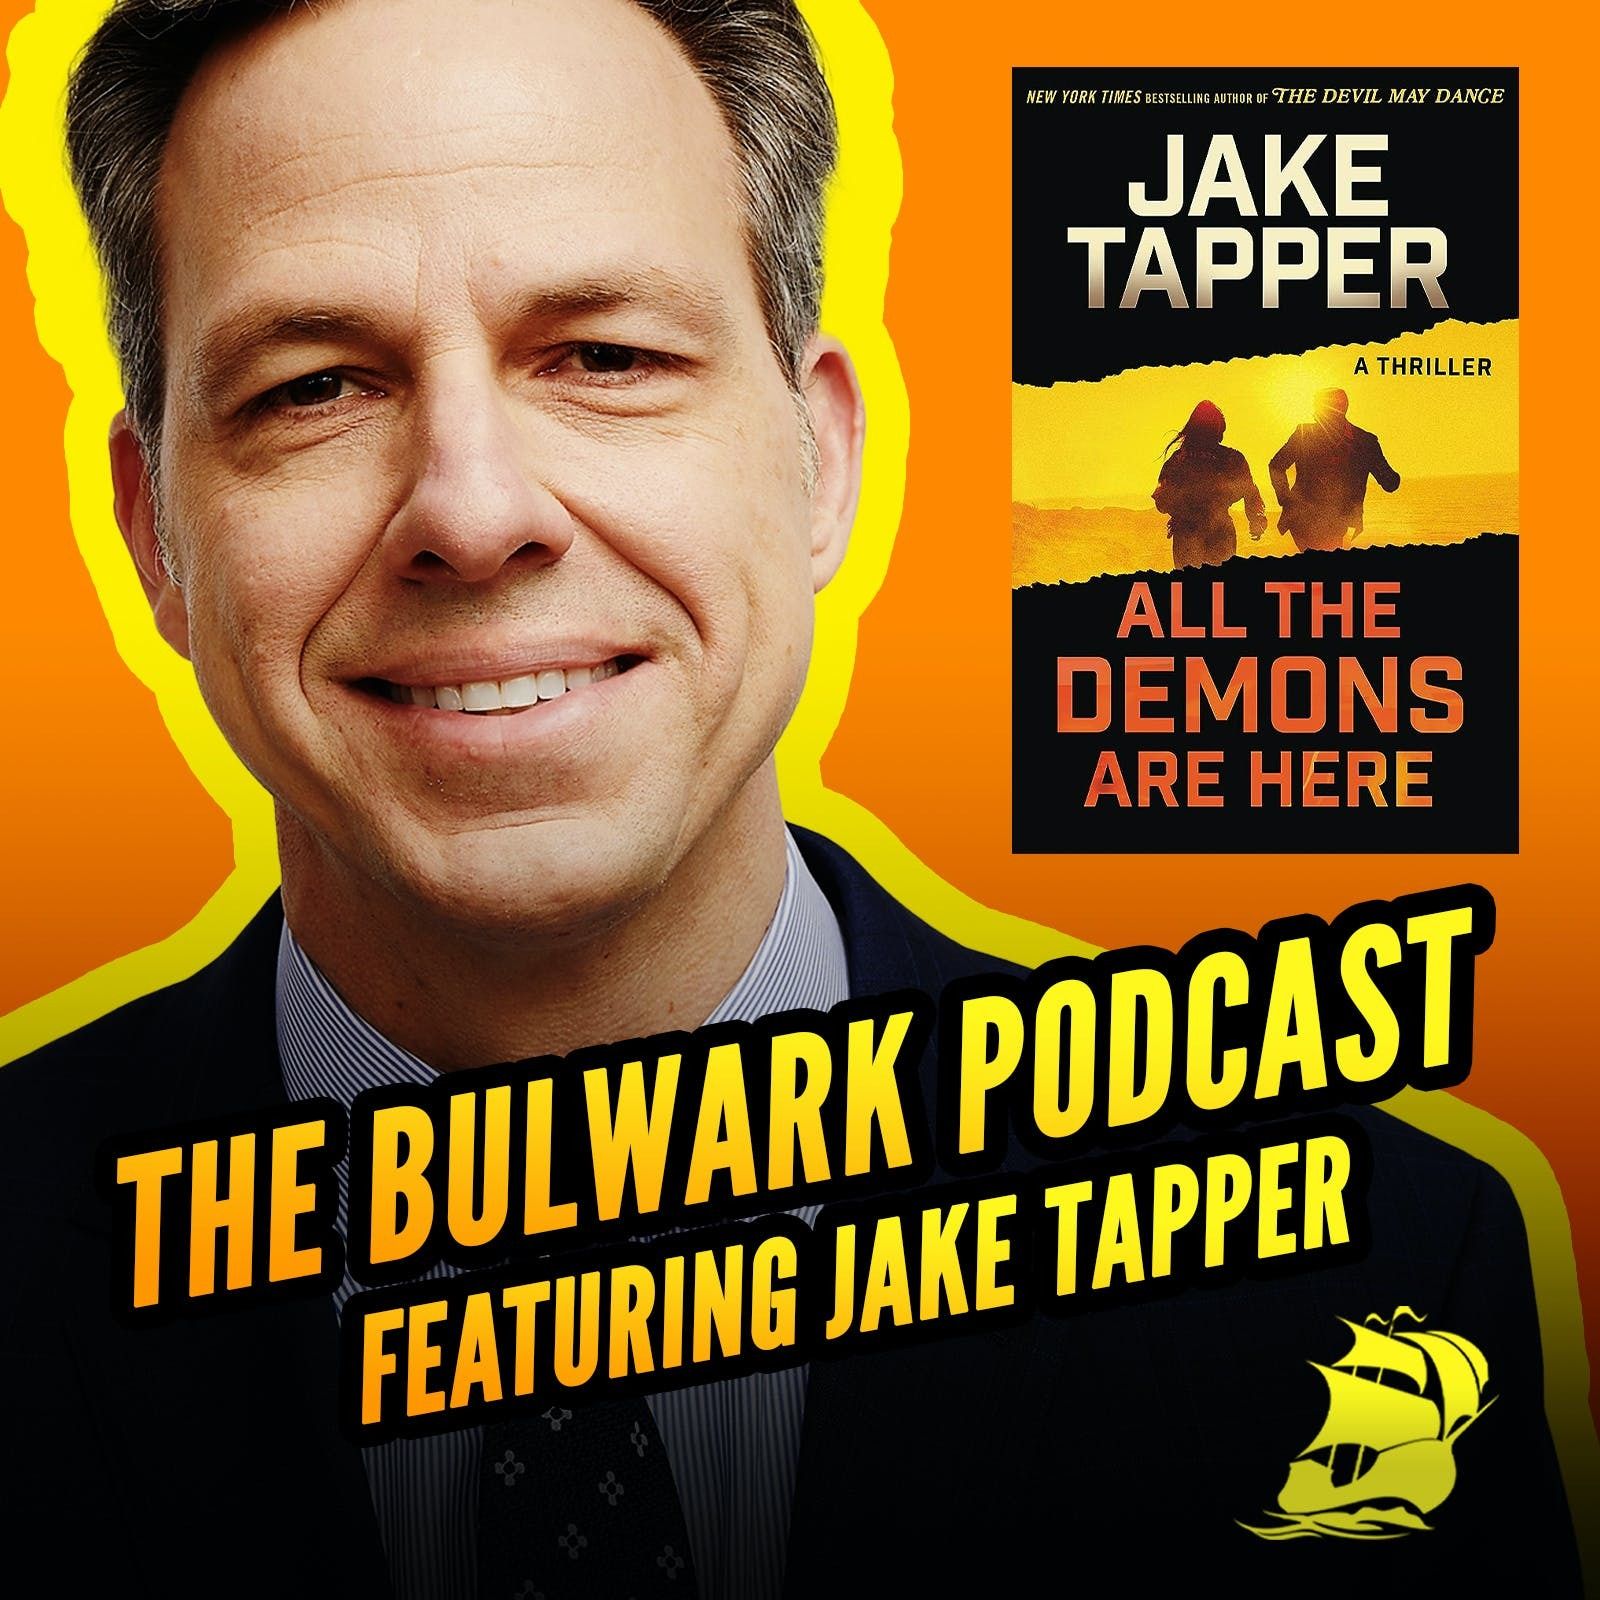 Jake Tapper: "All the Demons Are Here"